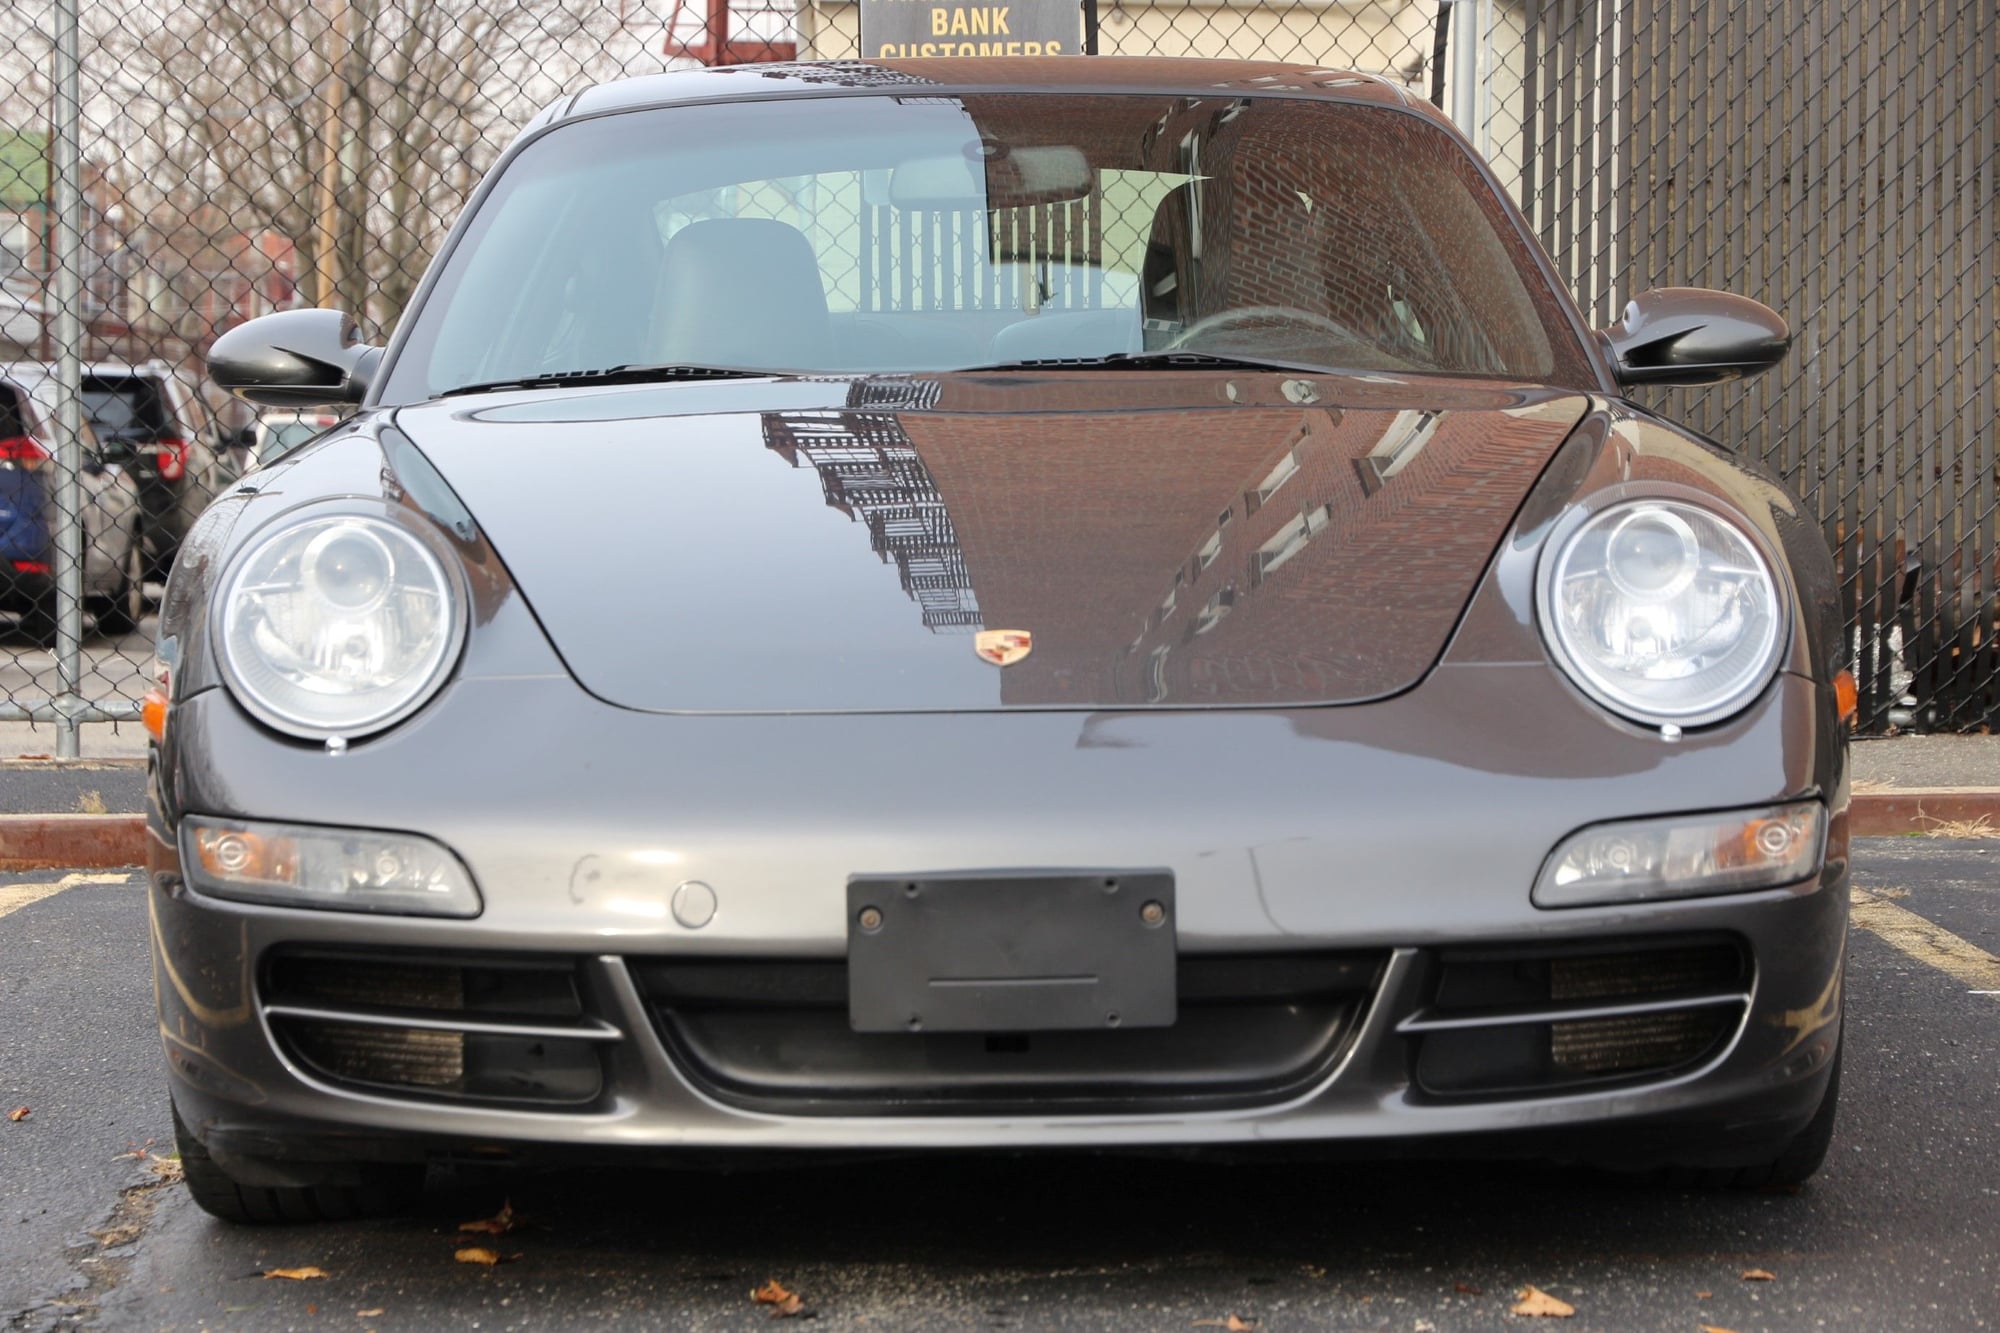 2006 Porsche 911 - 2006 Porsche 911 Carrera S 997.1 Manual *NYC* - Used - VIN WP0AB29946S740868 - 69,500 Miles - 6 cyl - 2WD - Manual - Coupe - Gray - Queens, NY 11415, United States